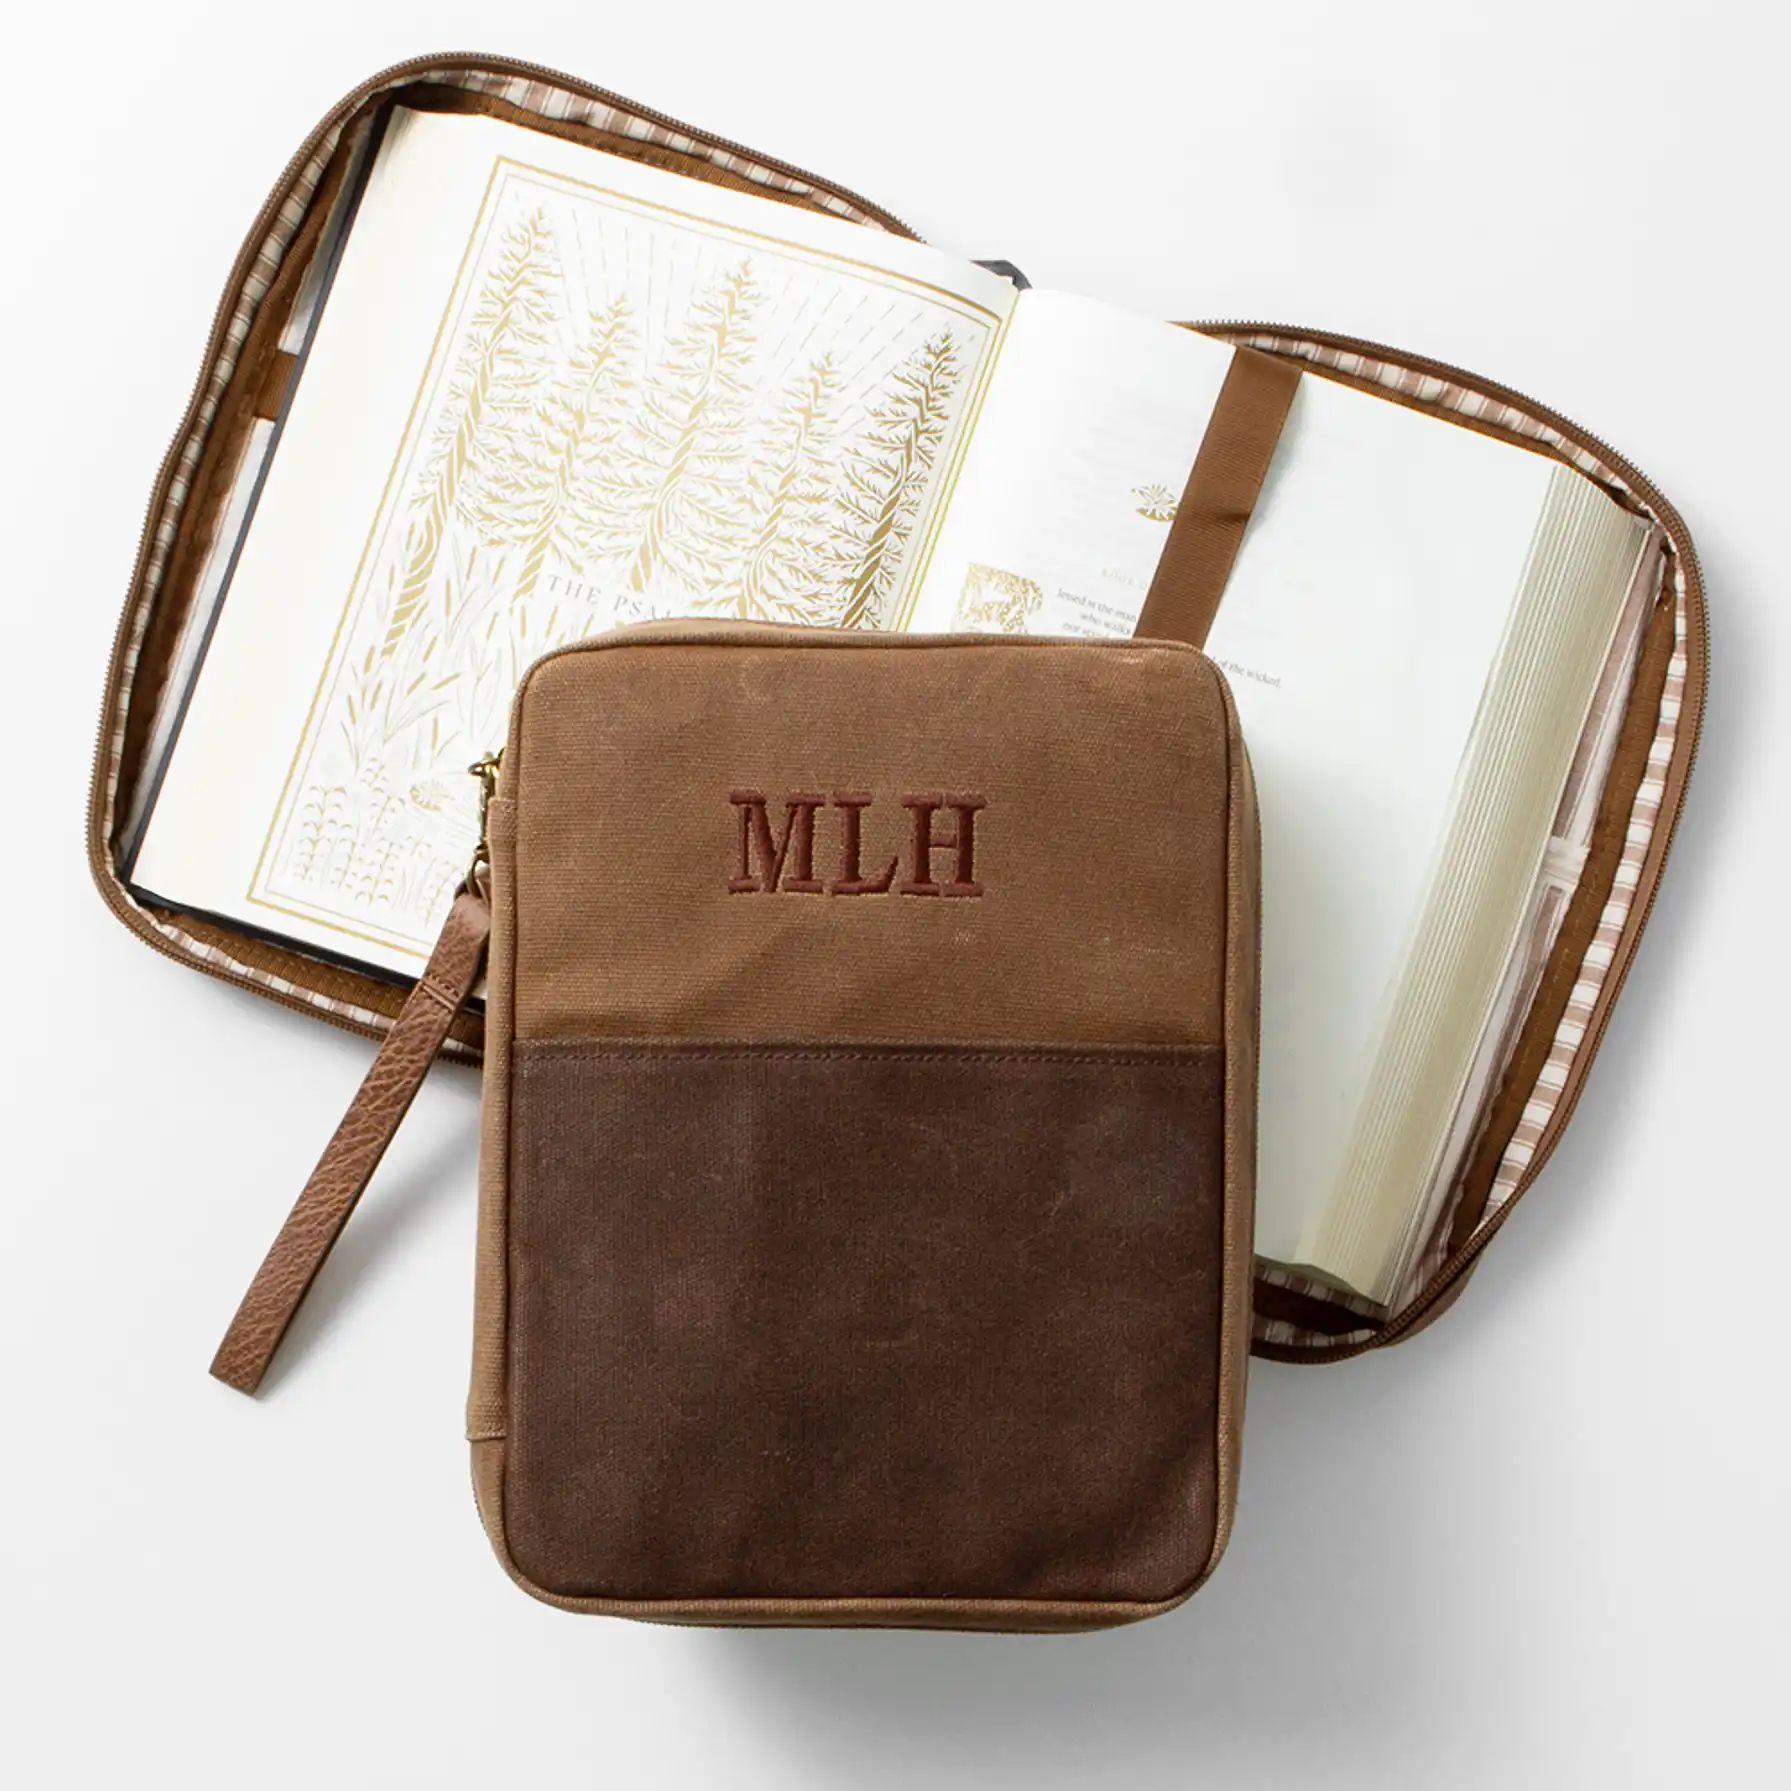 Personalized Bible Carrier | Marleylilly